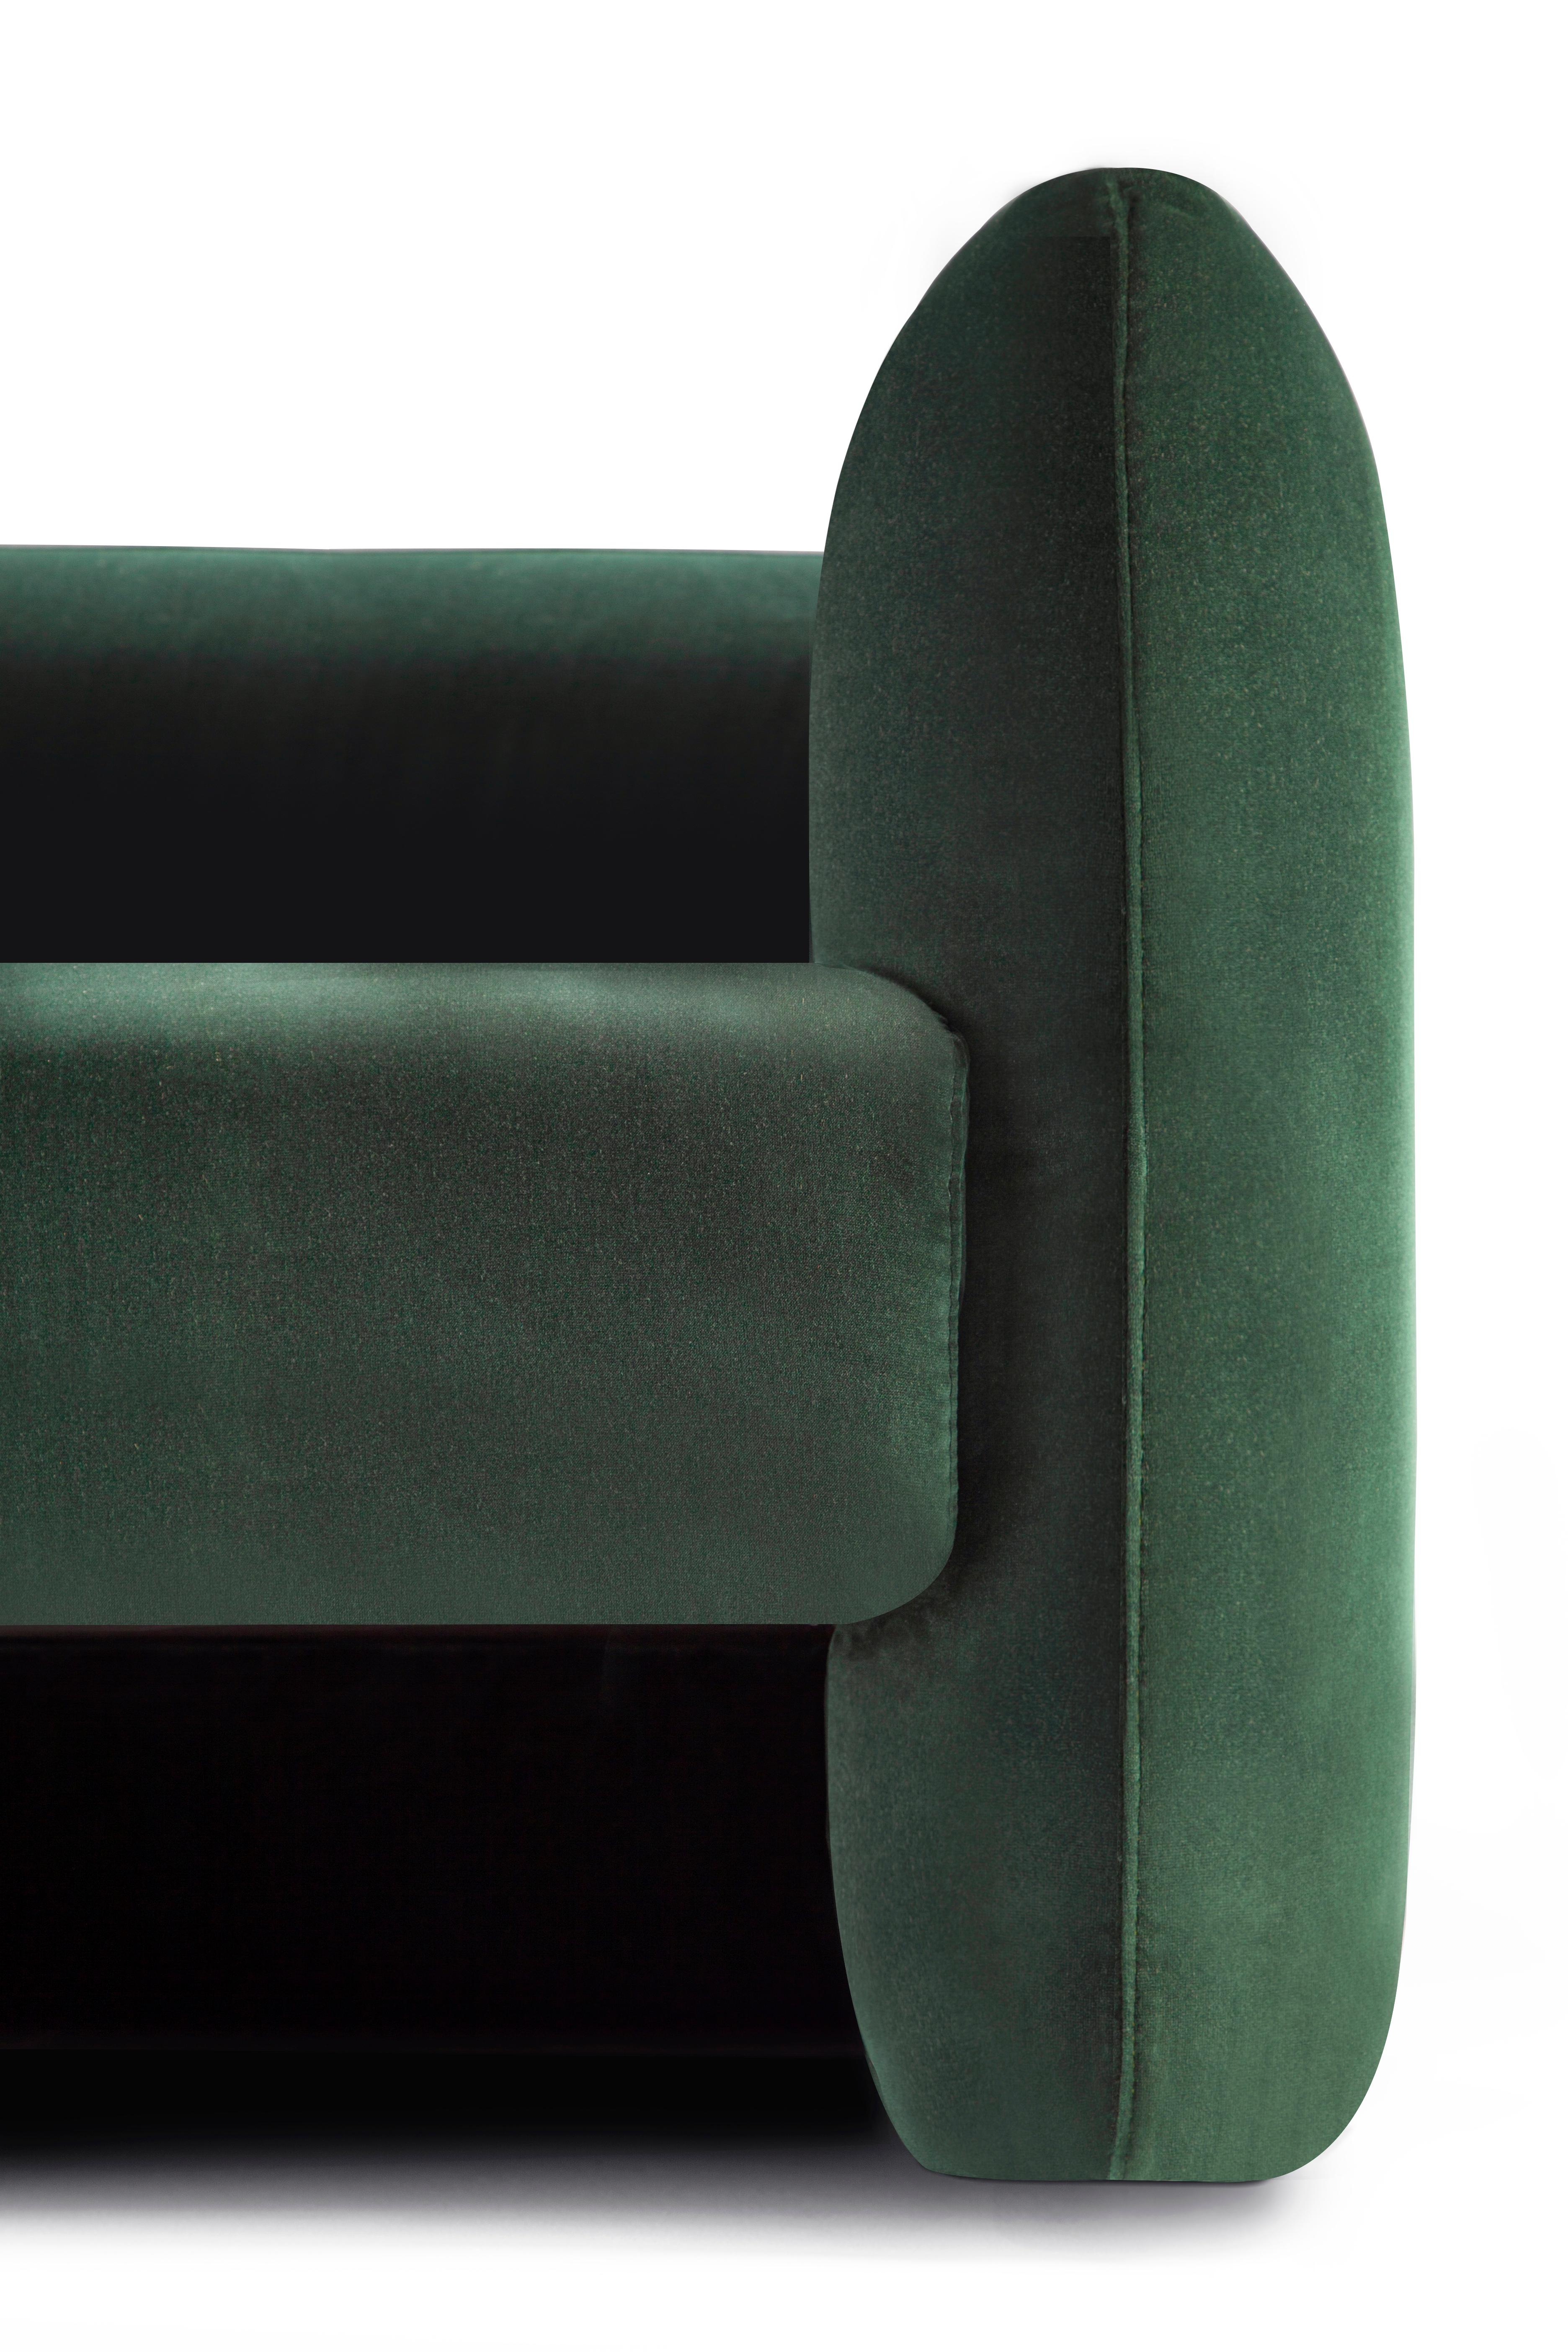 Portuguese Contemporary Modern Jacob Armchair in Green Velvet Fabric by Collector Studio For Sale